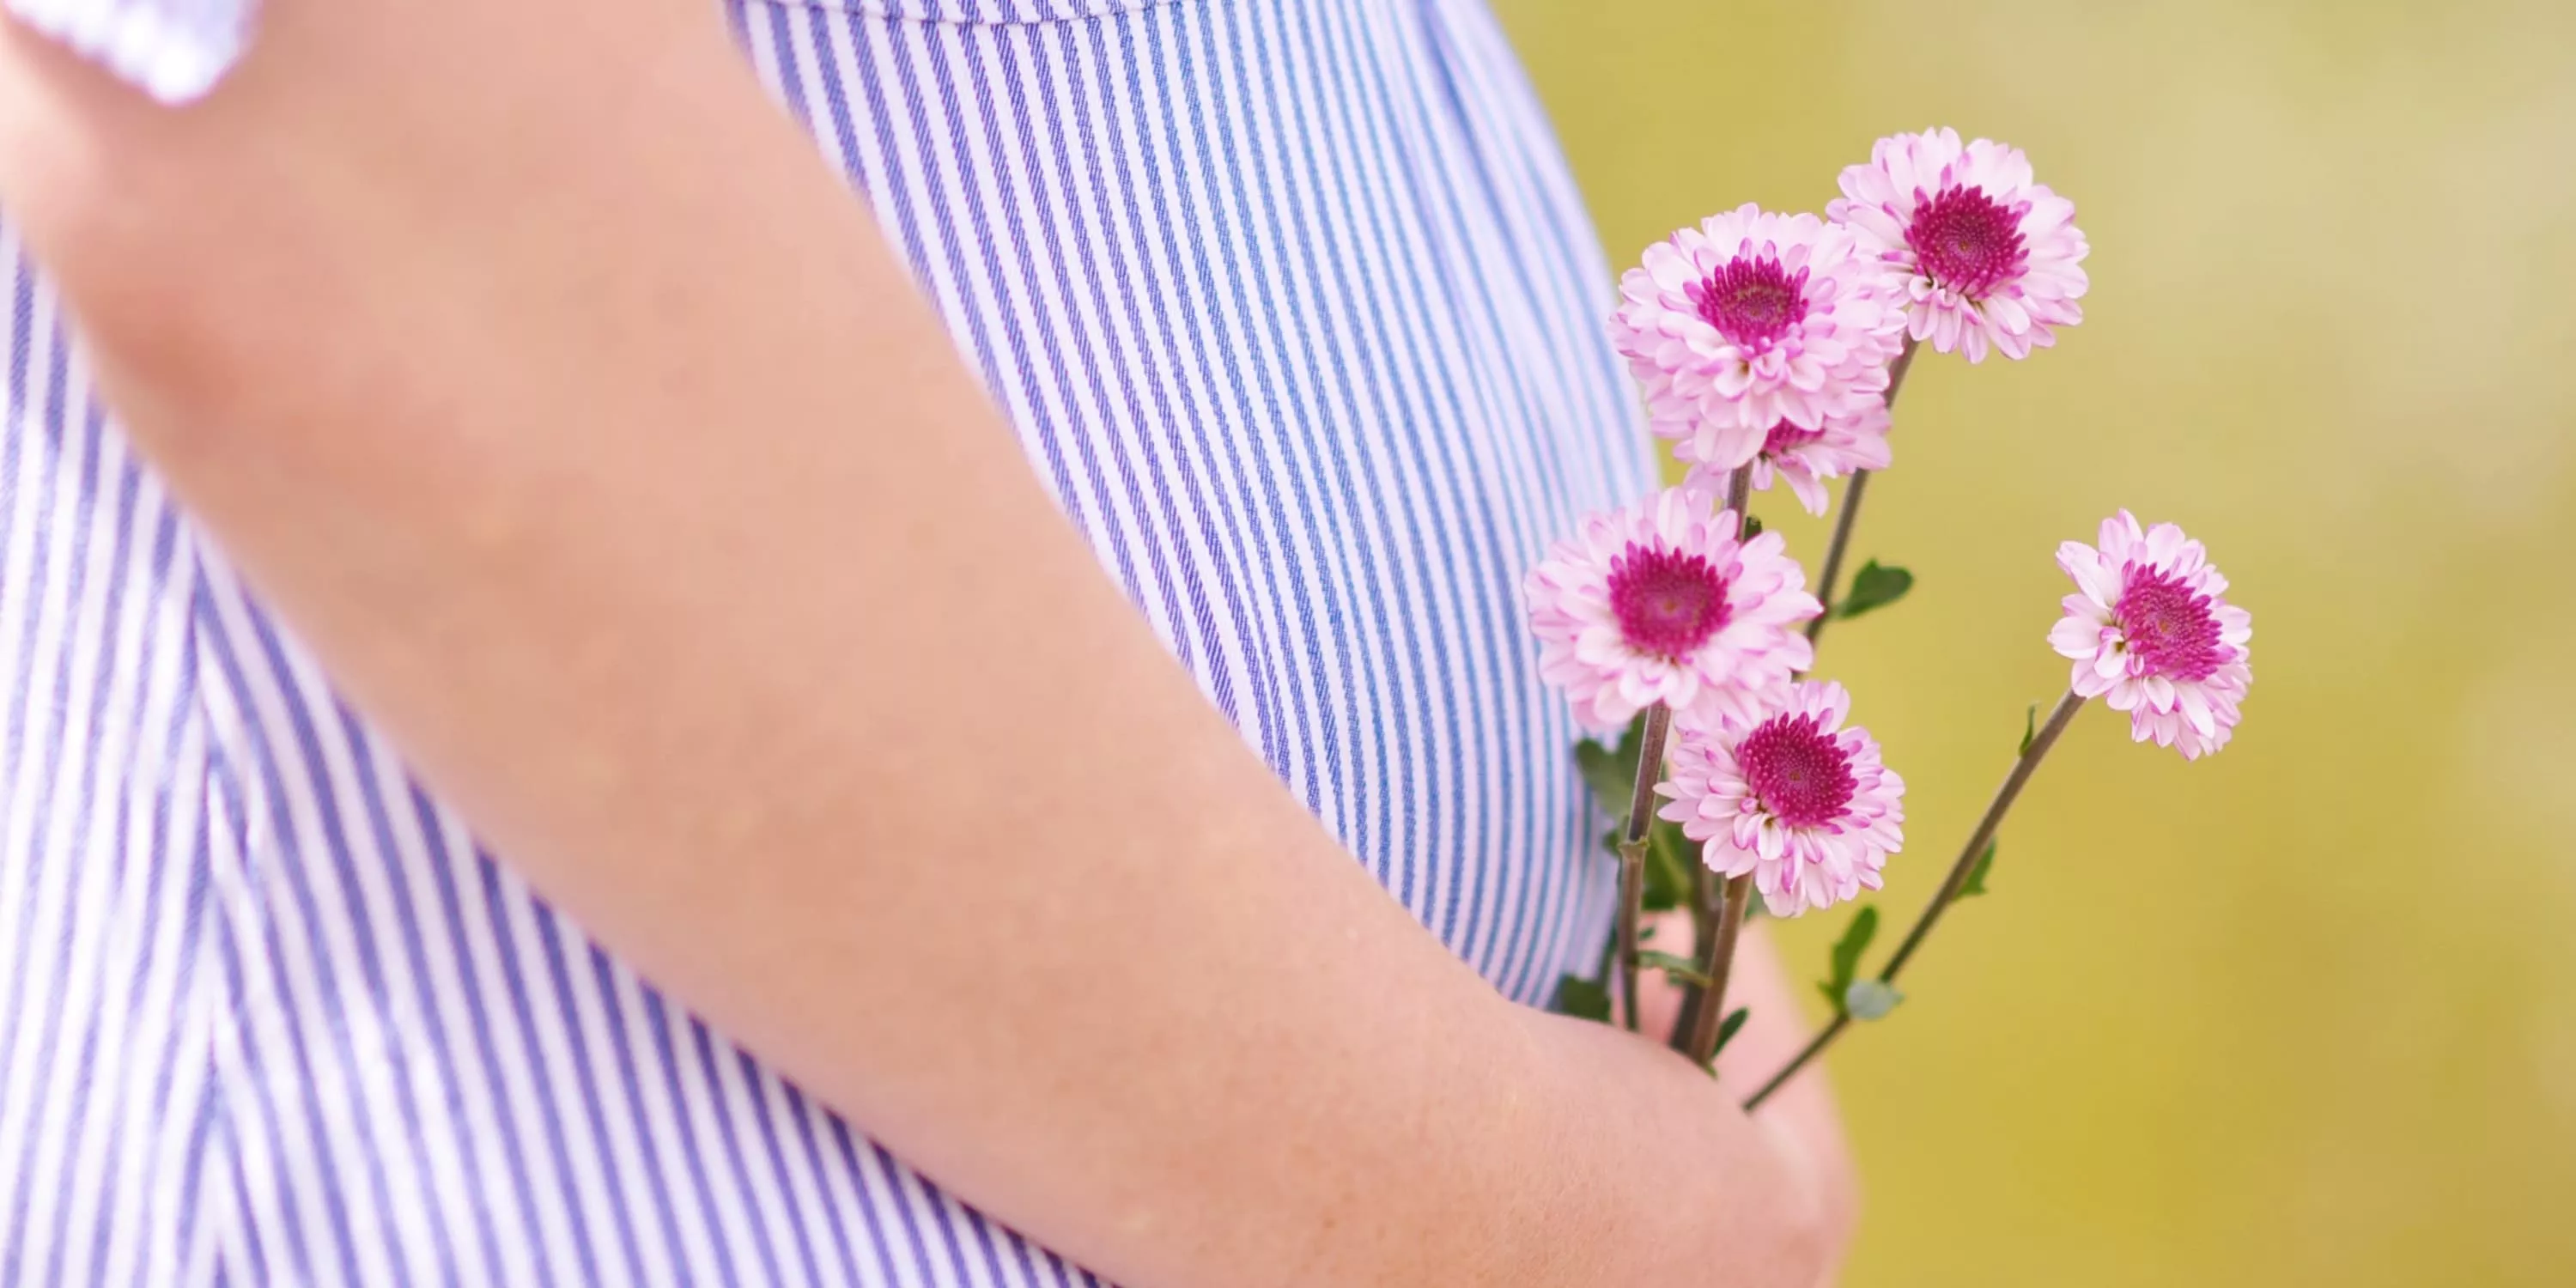 Woman holding flowers, showing part of her baby bump